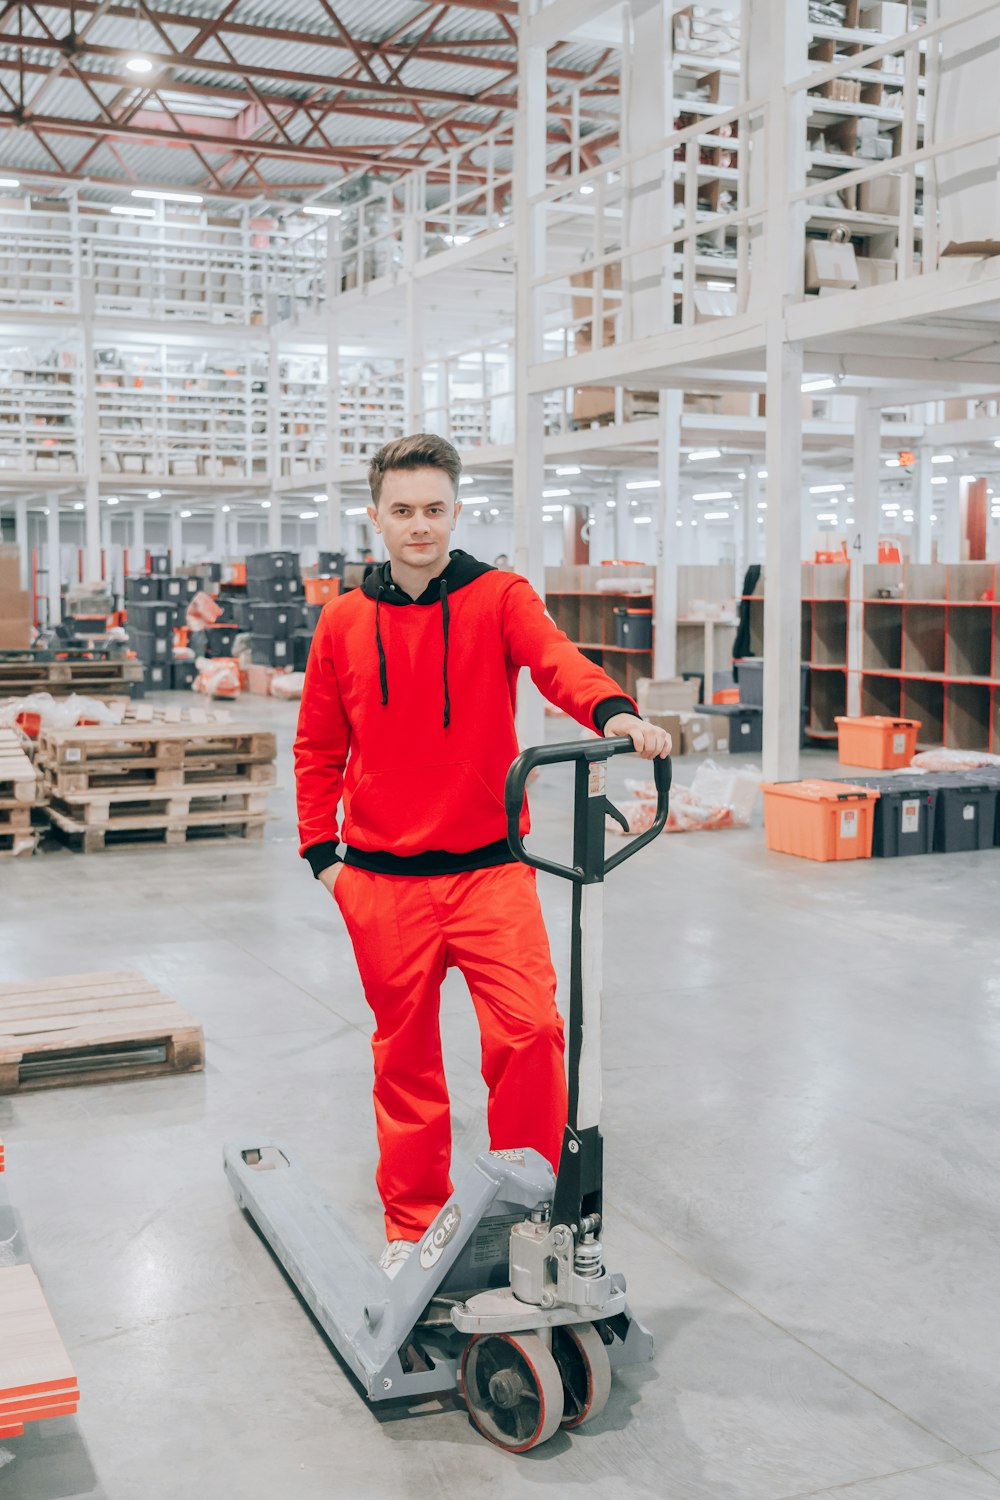 man in red sweater and black pants holding red and black hand truck